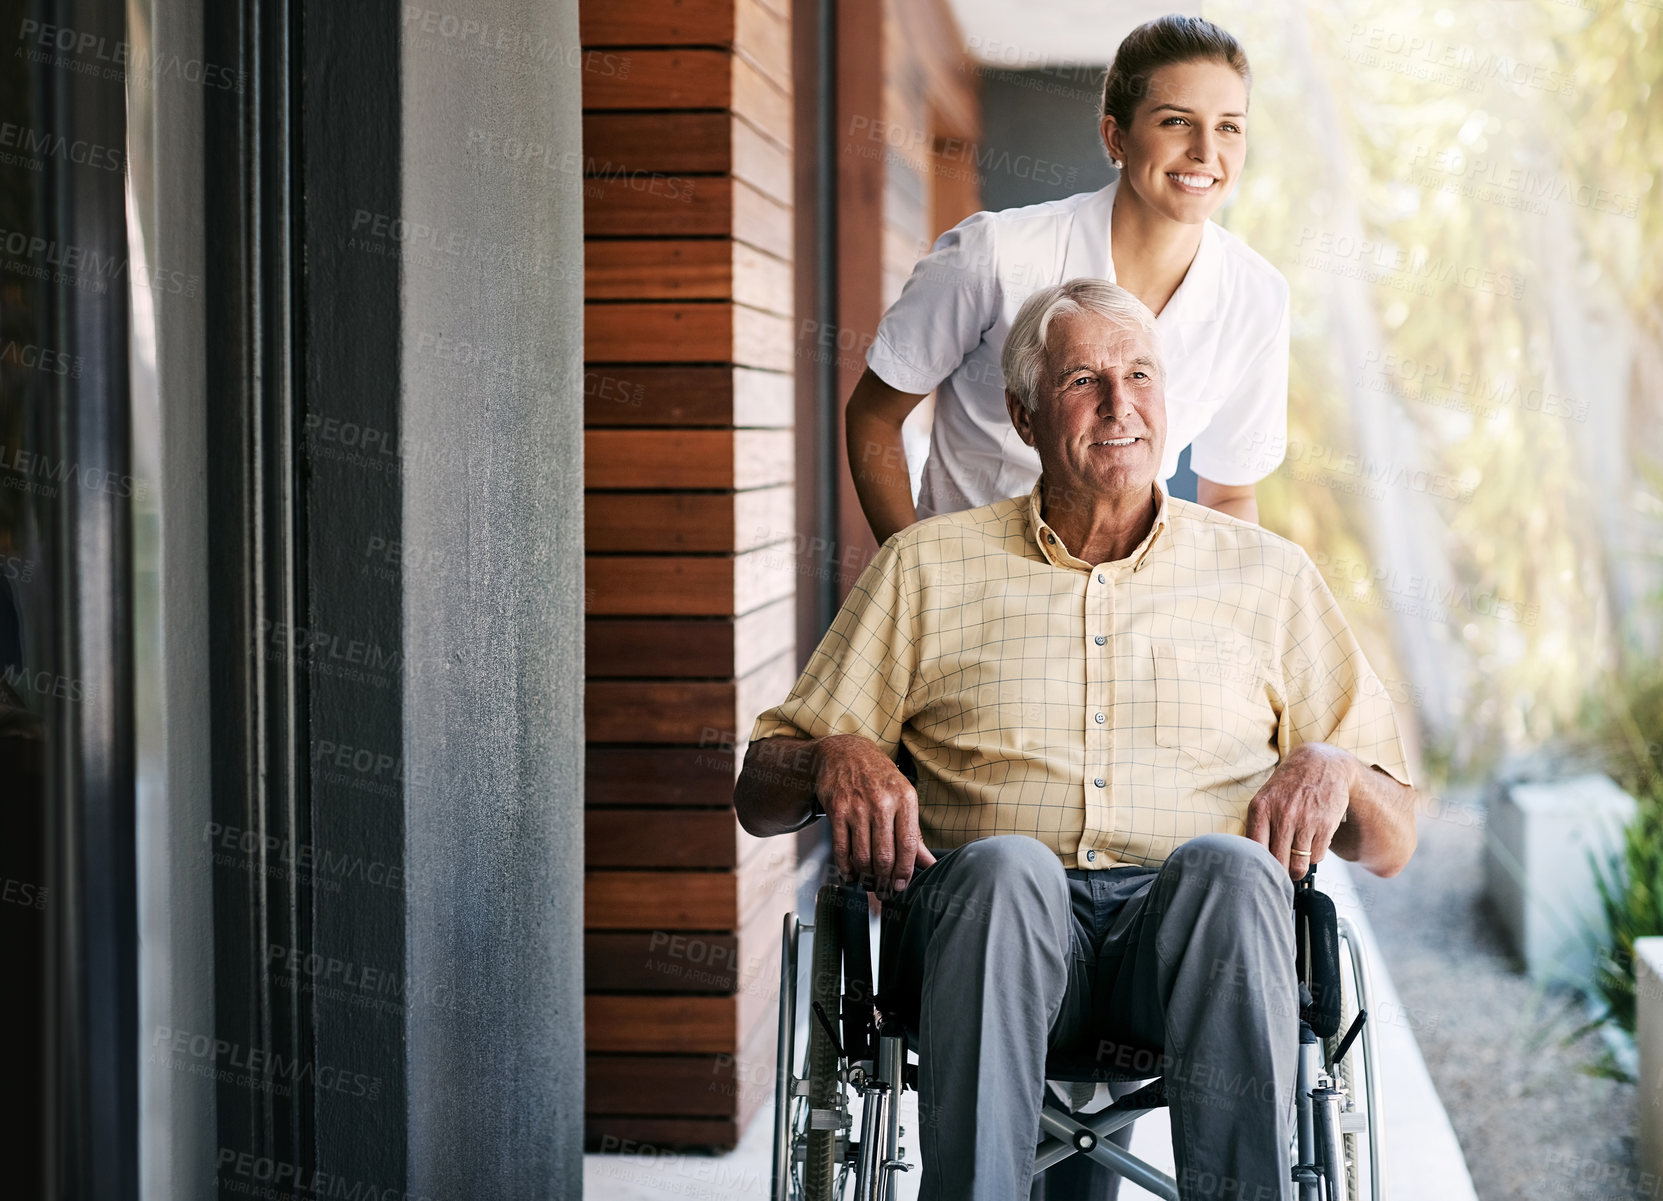 Buy stock photo Shot of a nurse caring for a senior patient in a wheelchair outside a retirement home